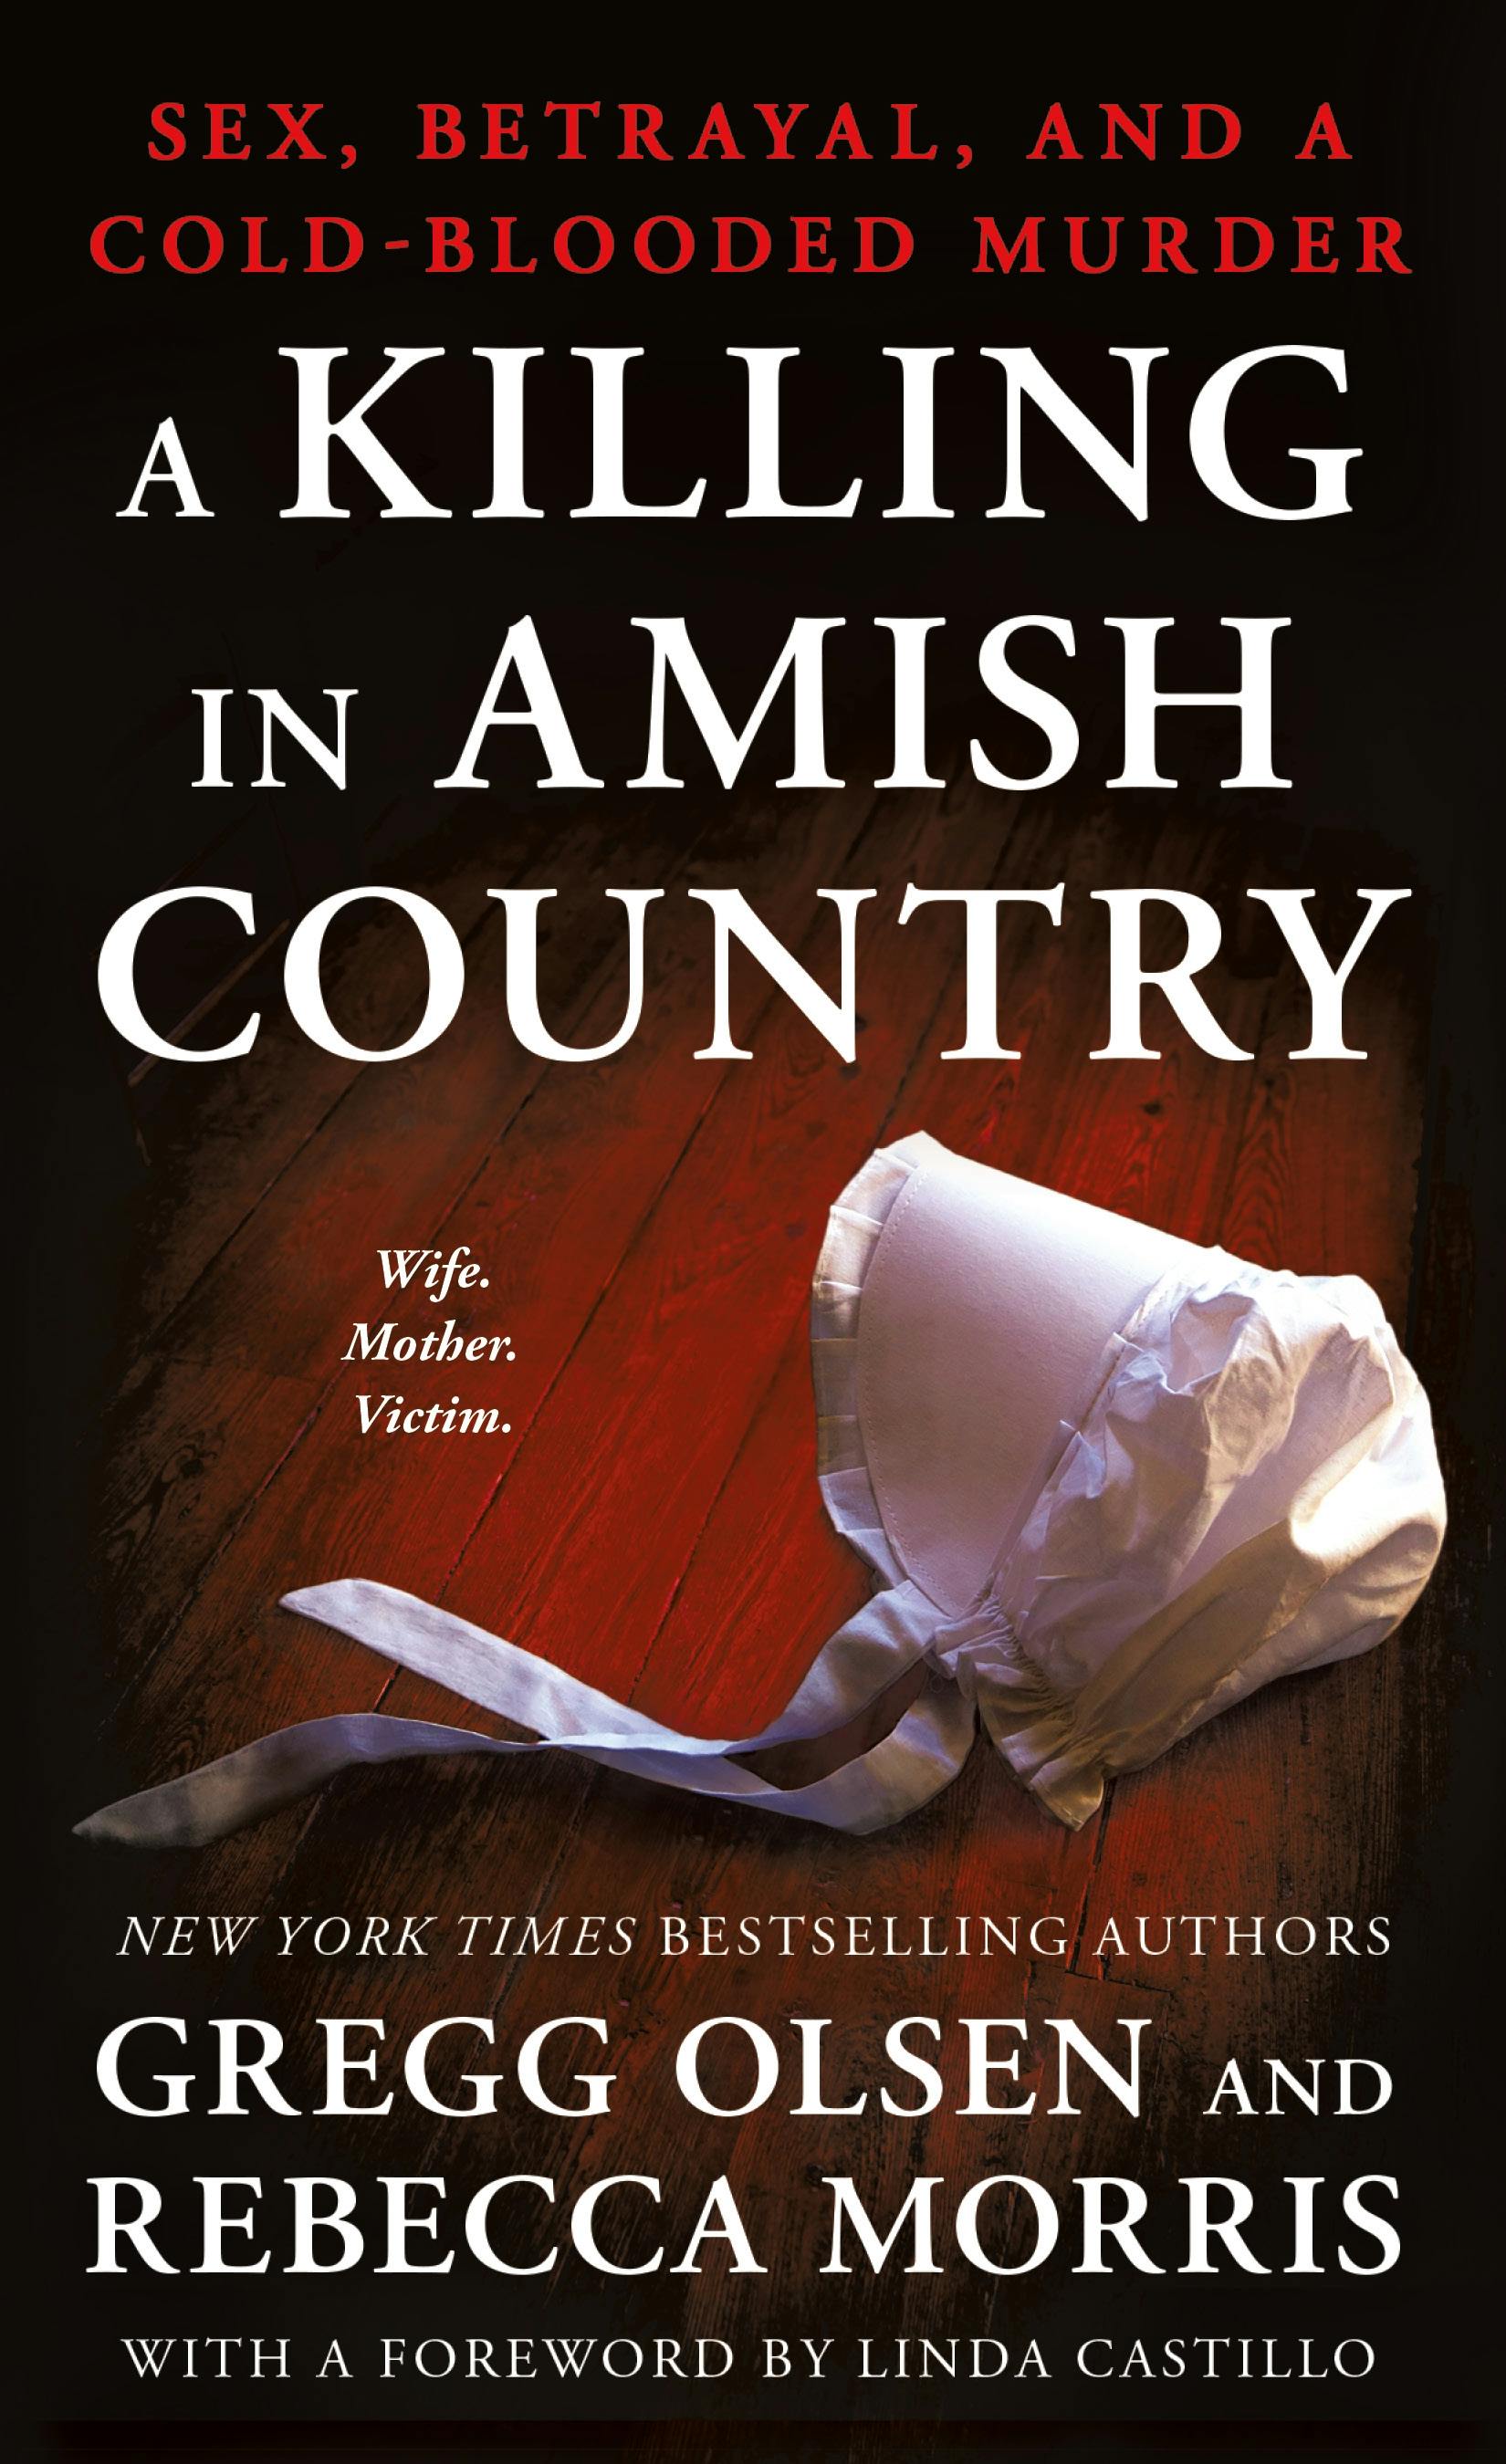 A Killing in Amish Country image